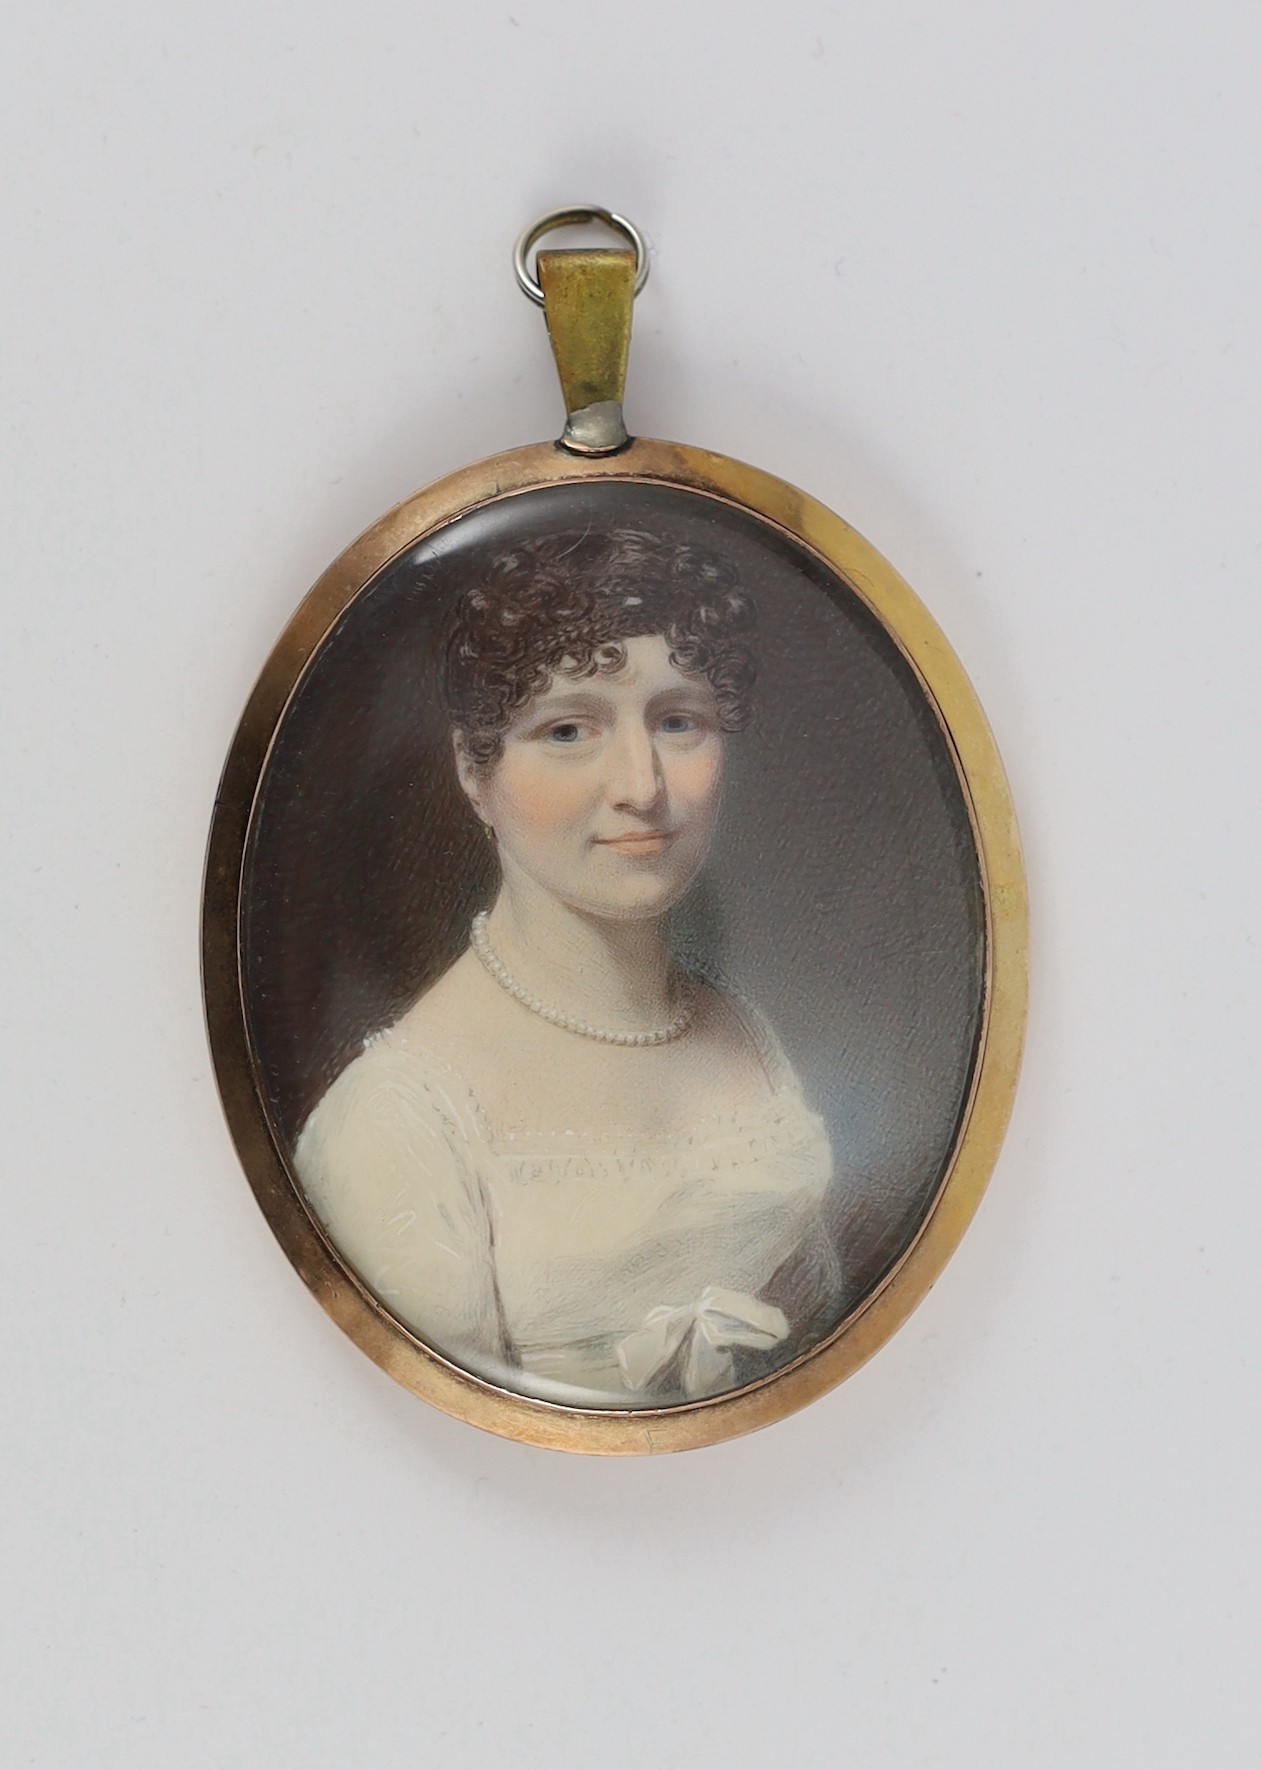 Attributed to George Patten (British, 1801-1865), Portrait miniature of a lady, watercolour on ivory, 6.5 x 5.25cm, gold hair back frame